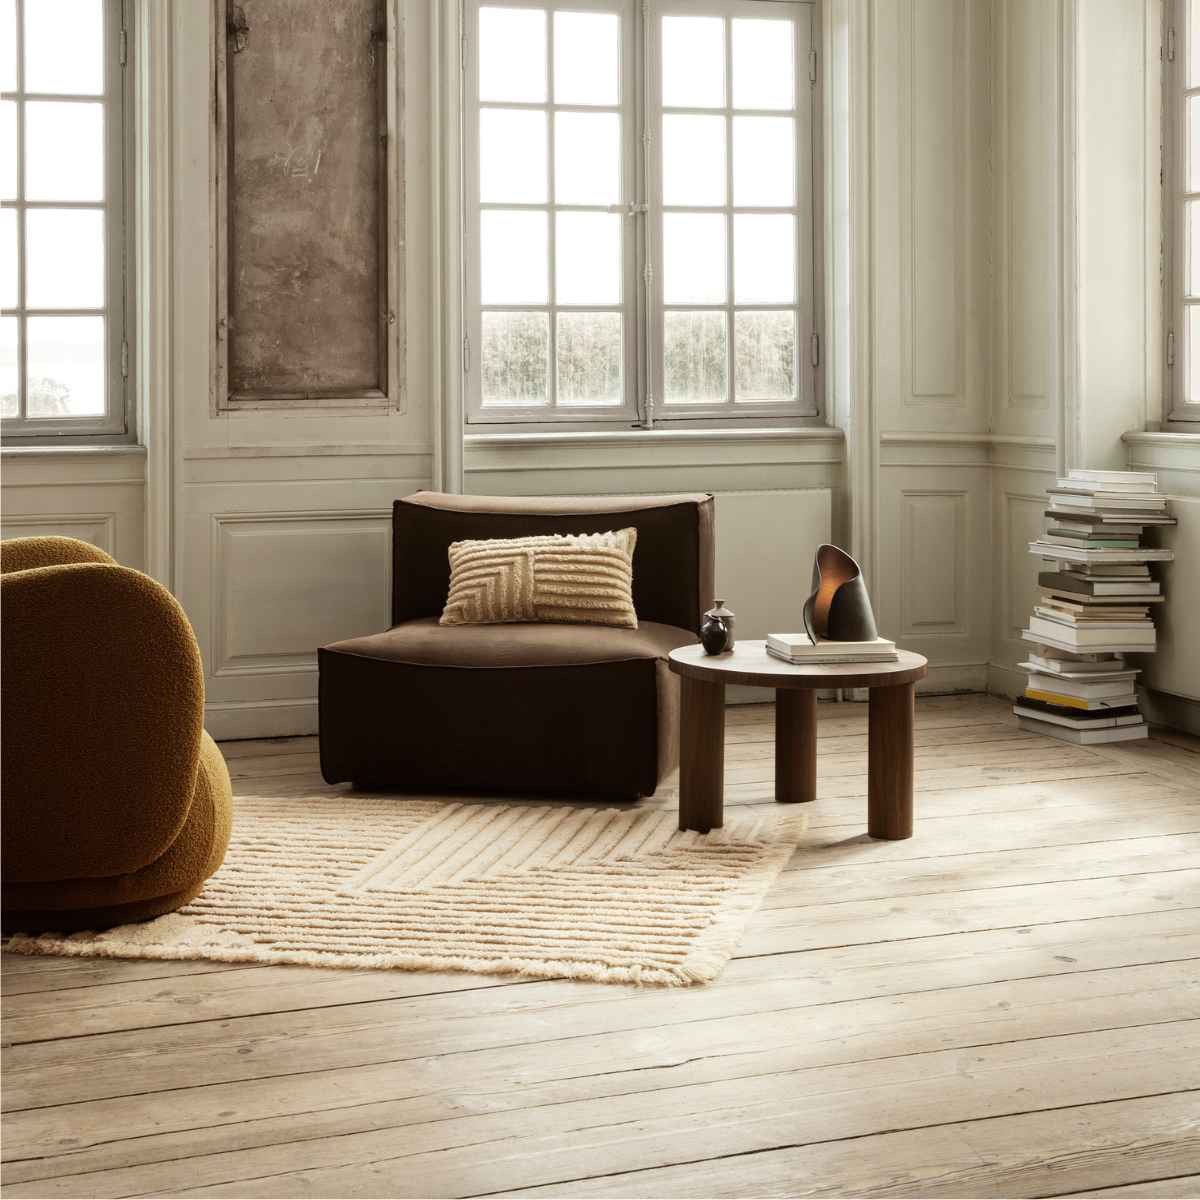 Post Coffee Table Small Lines - ferm LIVING